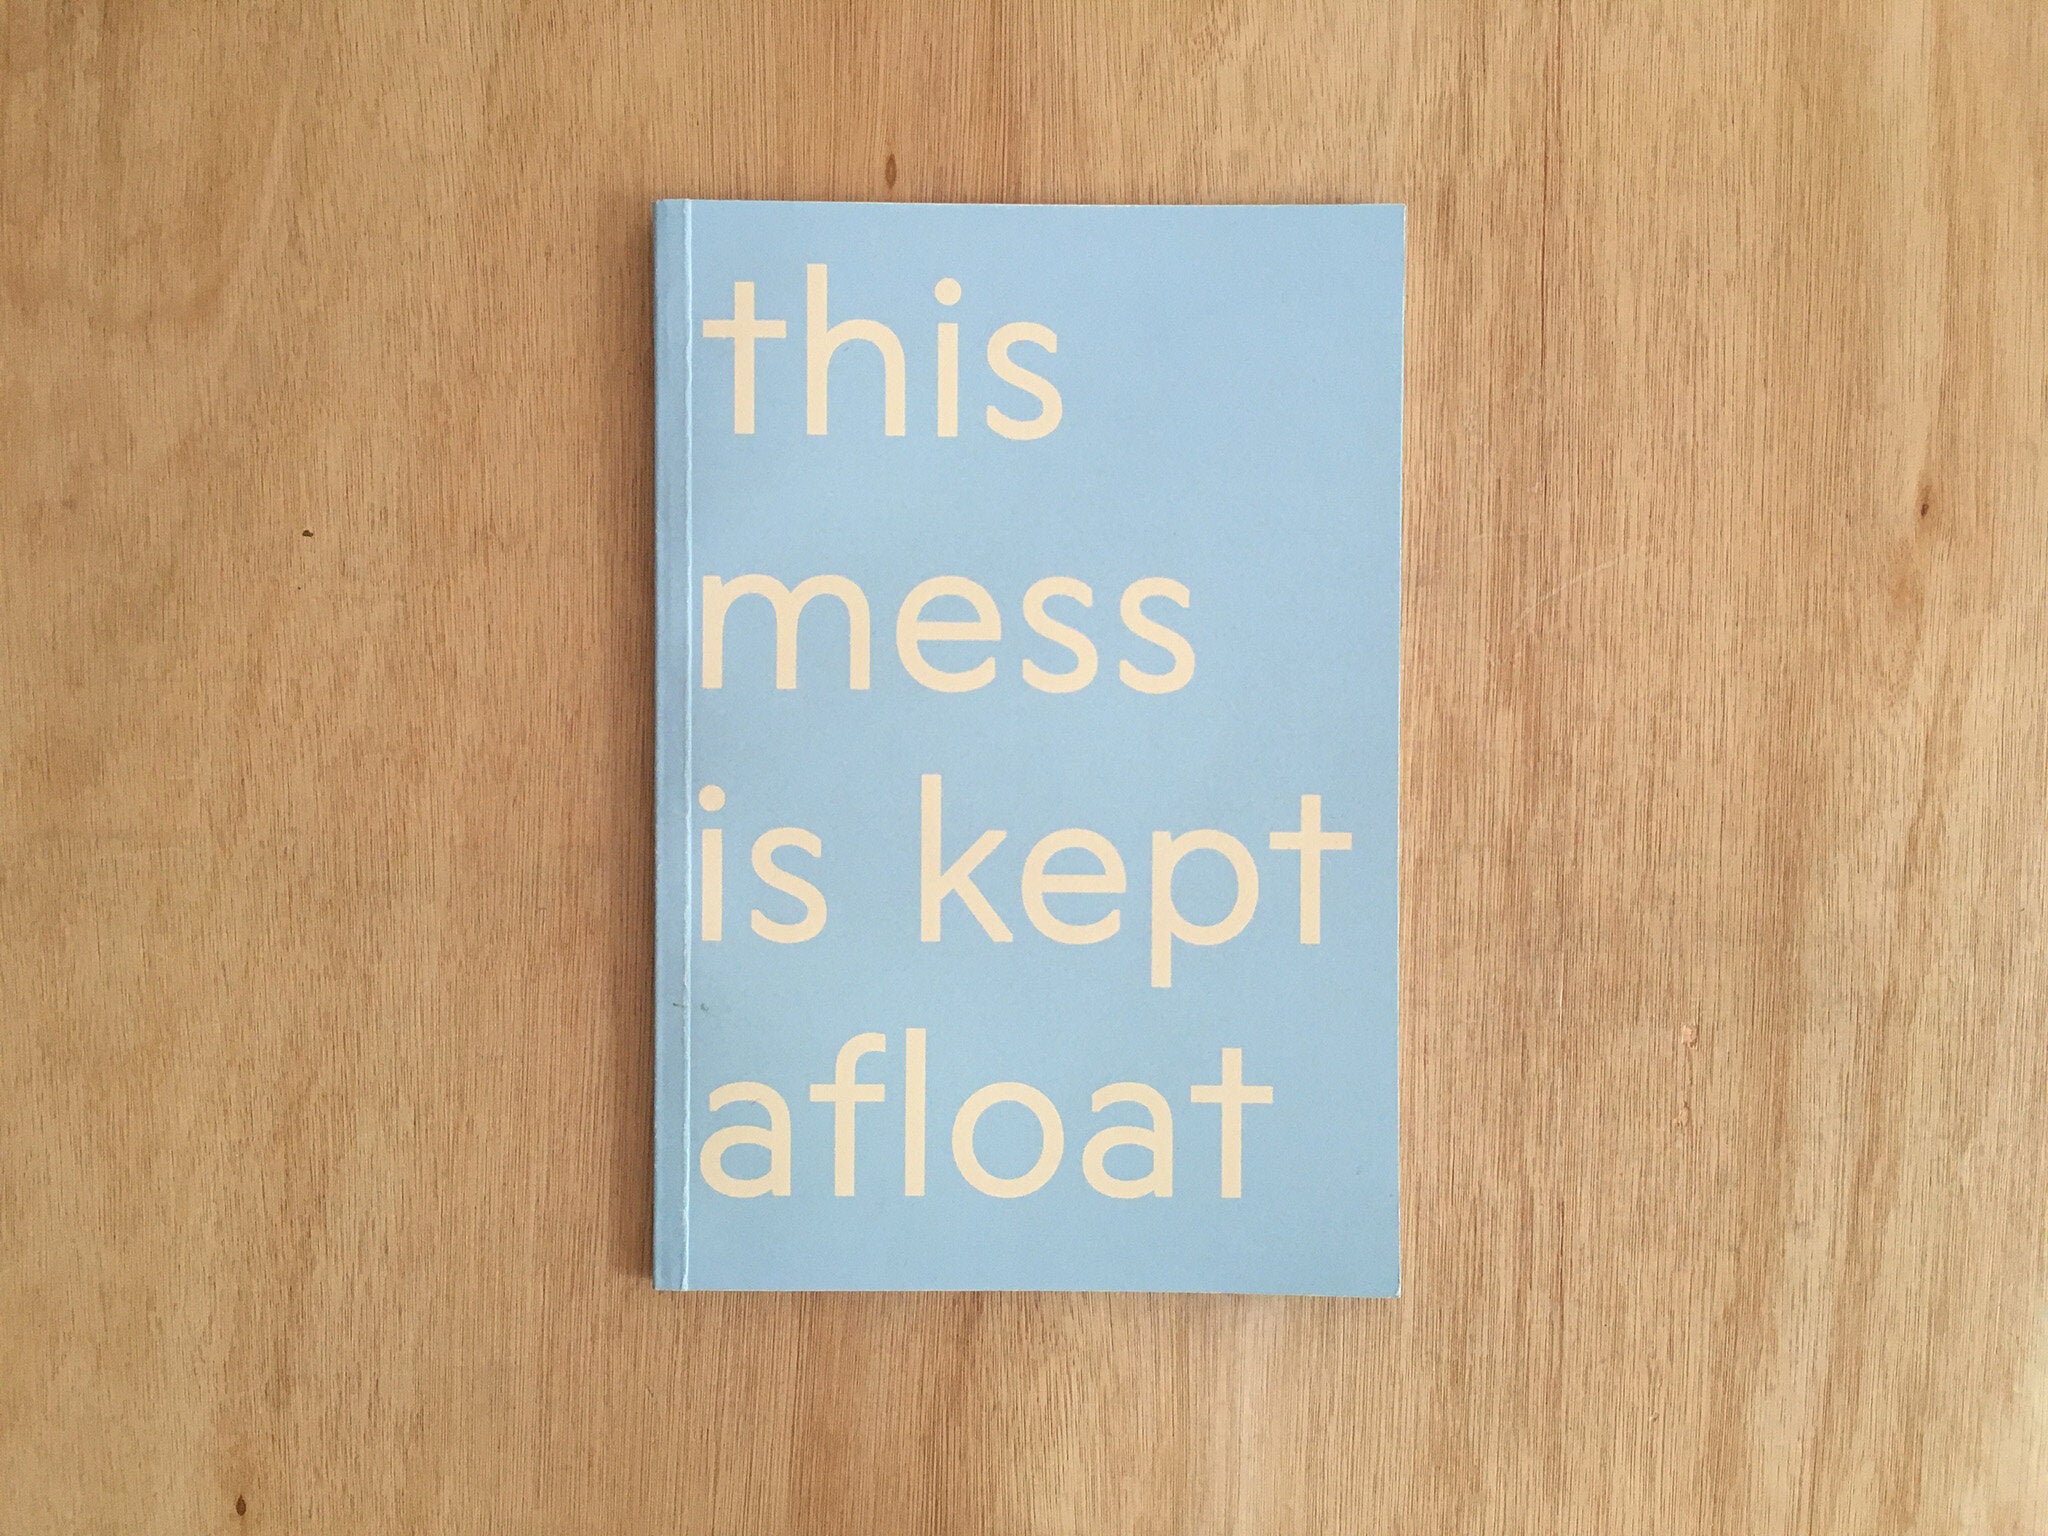 THIS MESS IS KEPT AFLOAT by Kate V Robertson